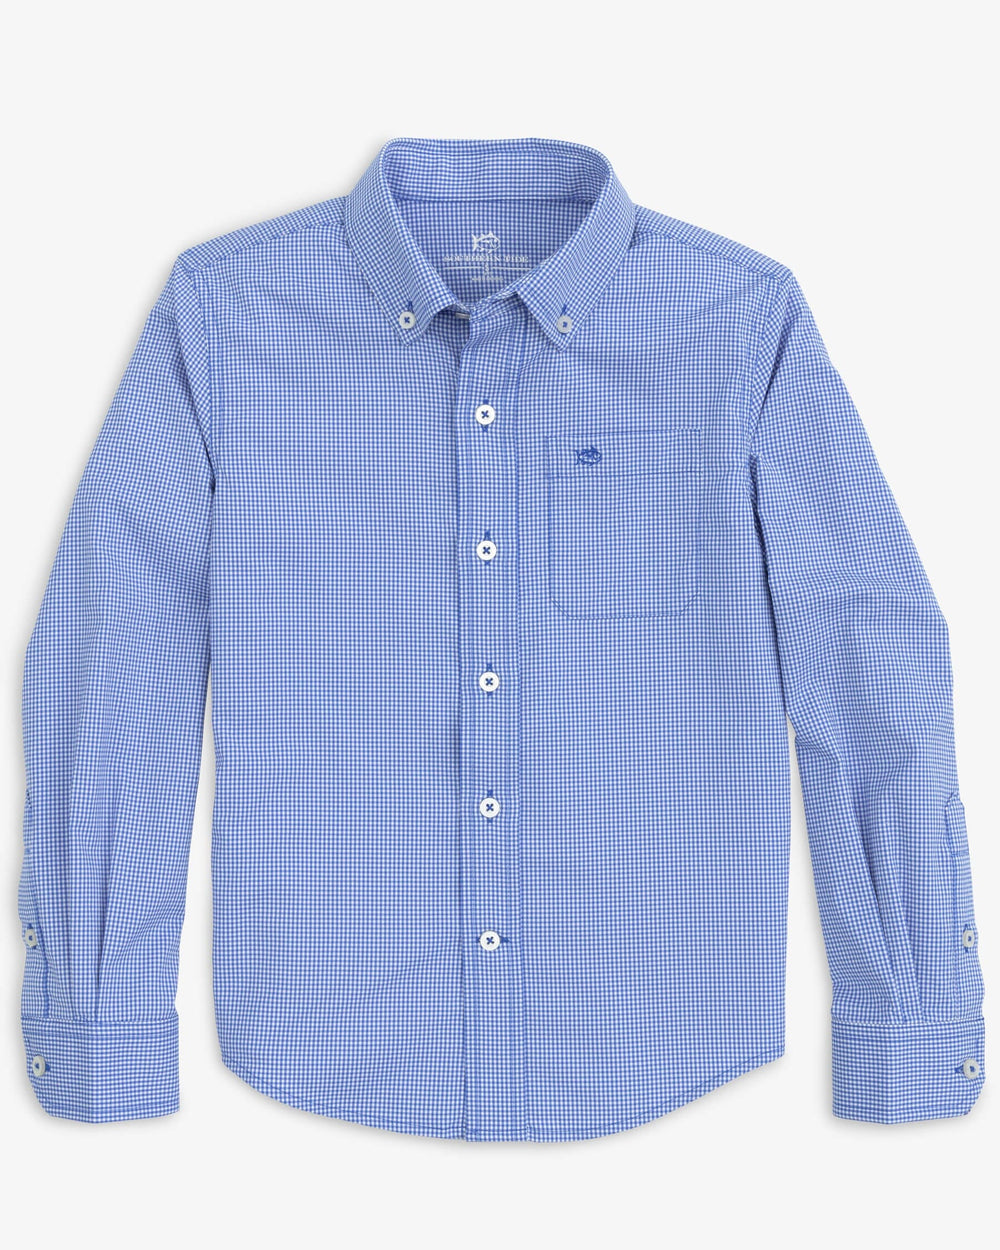 The front view of the Southern Tide Boys mini gingham intercoastal buttn down shirt by Southern Tide - Cobalt Blue